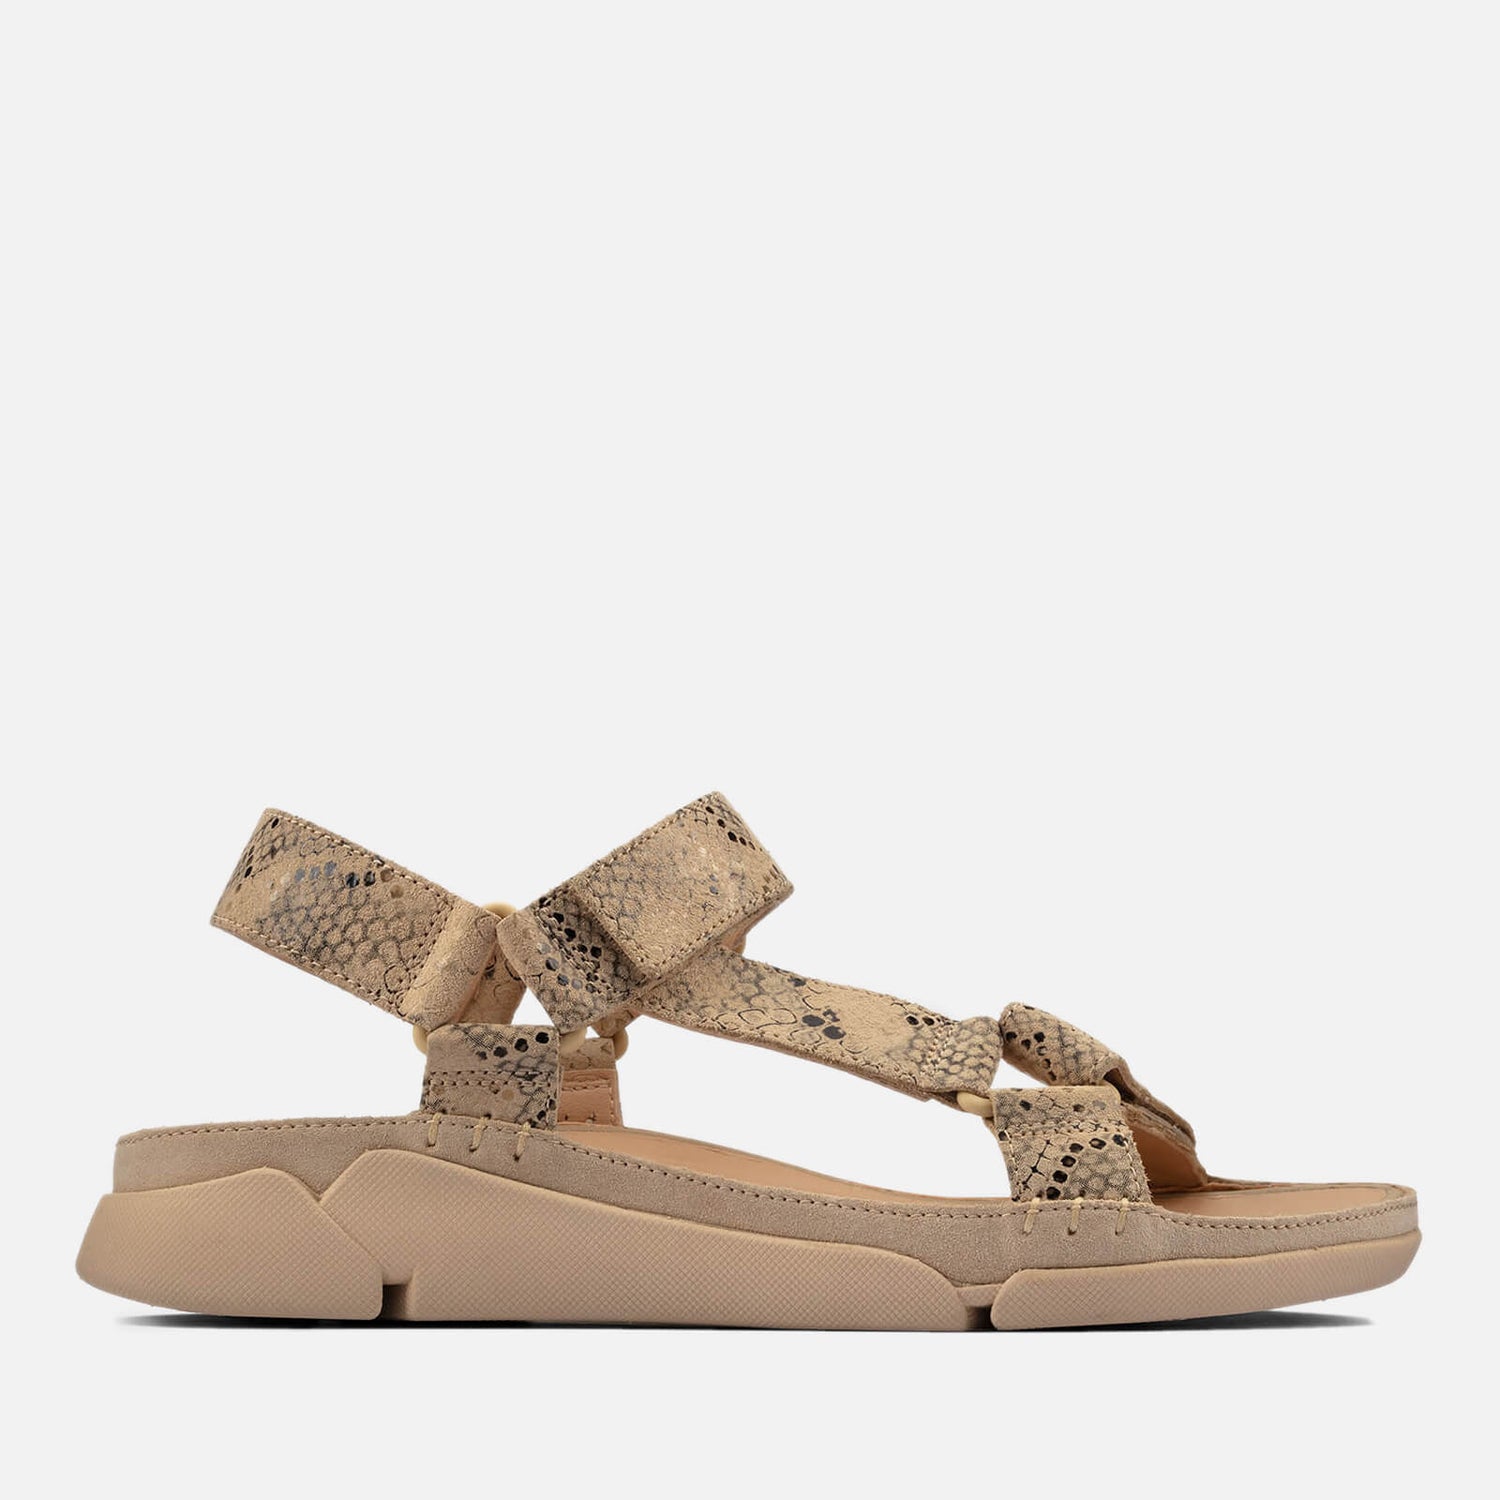 Clarks Women's Tri Sporty Sandals - Taupe Snake - UK 3